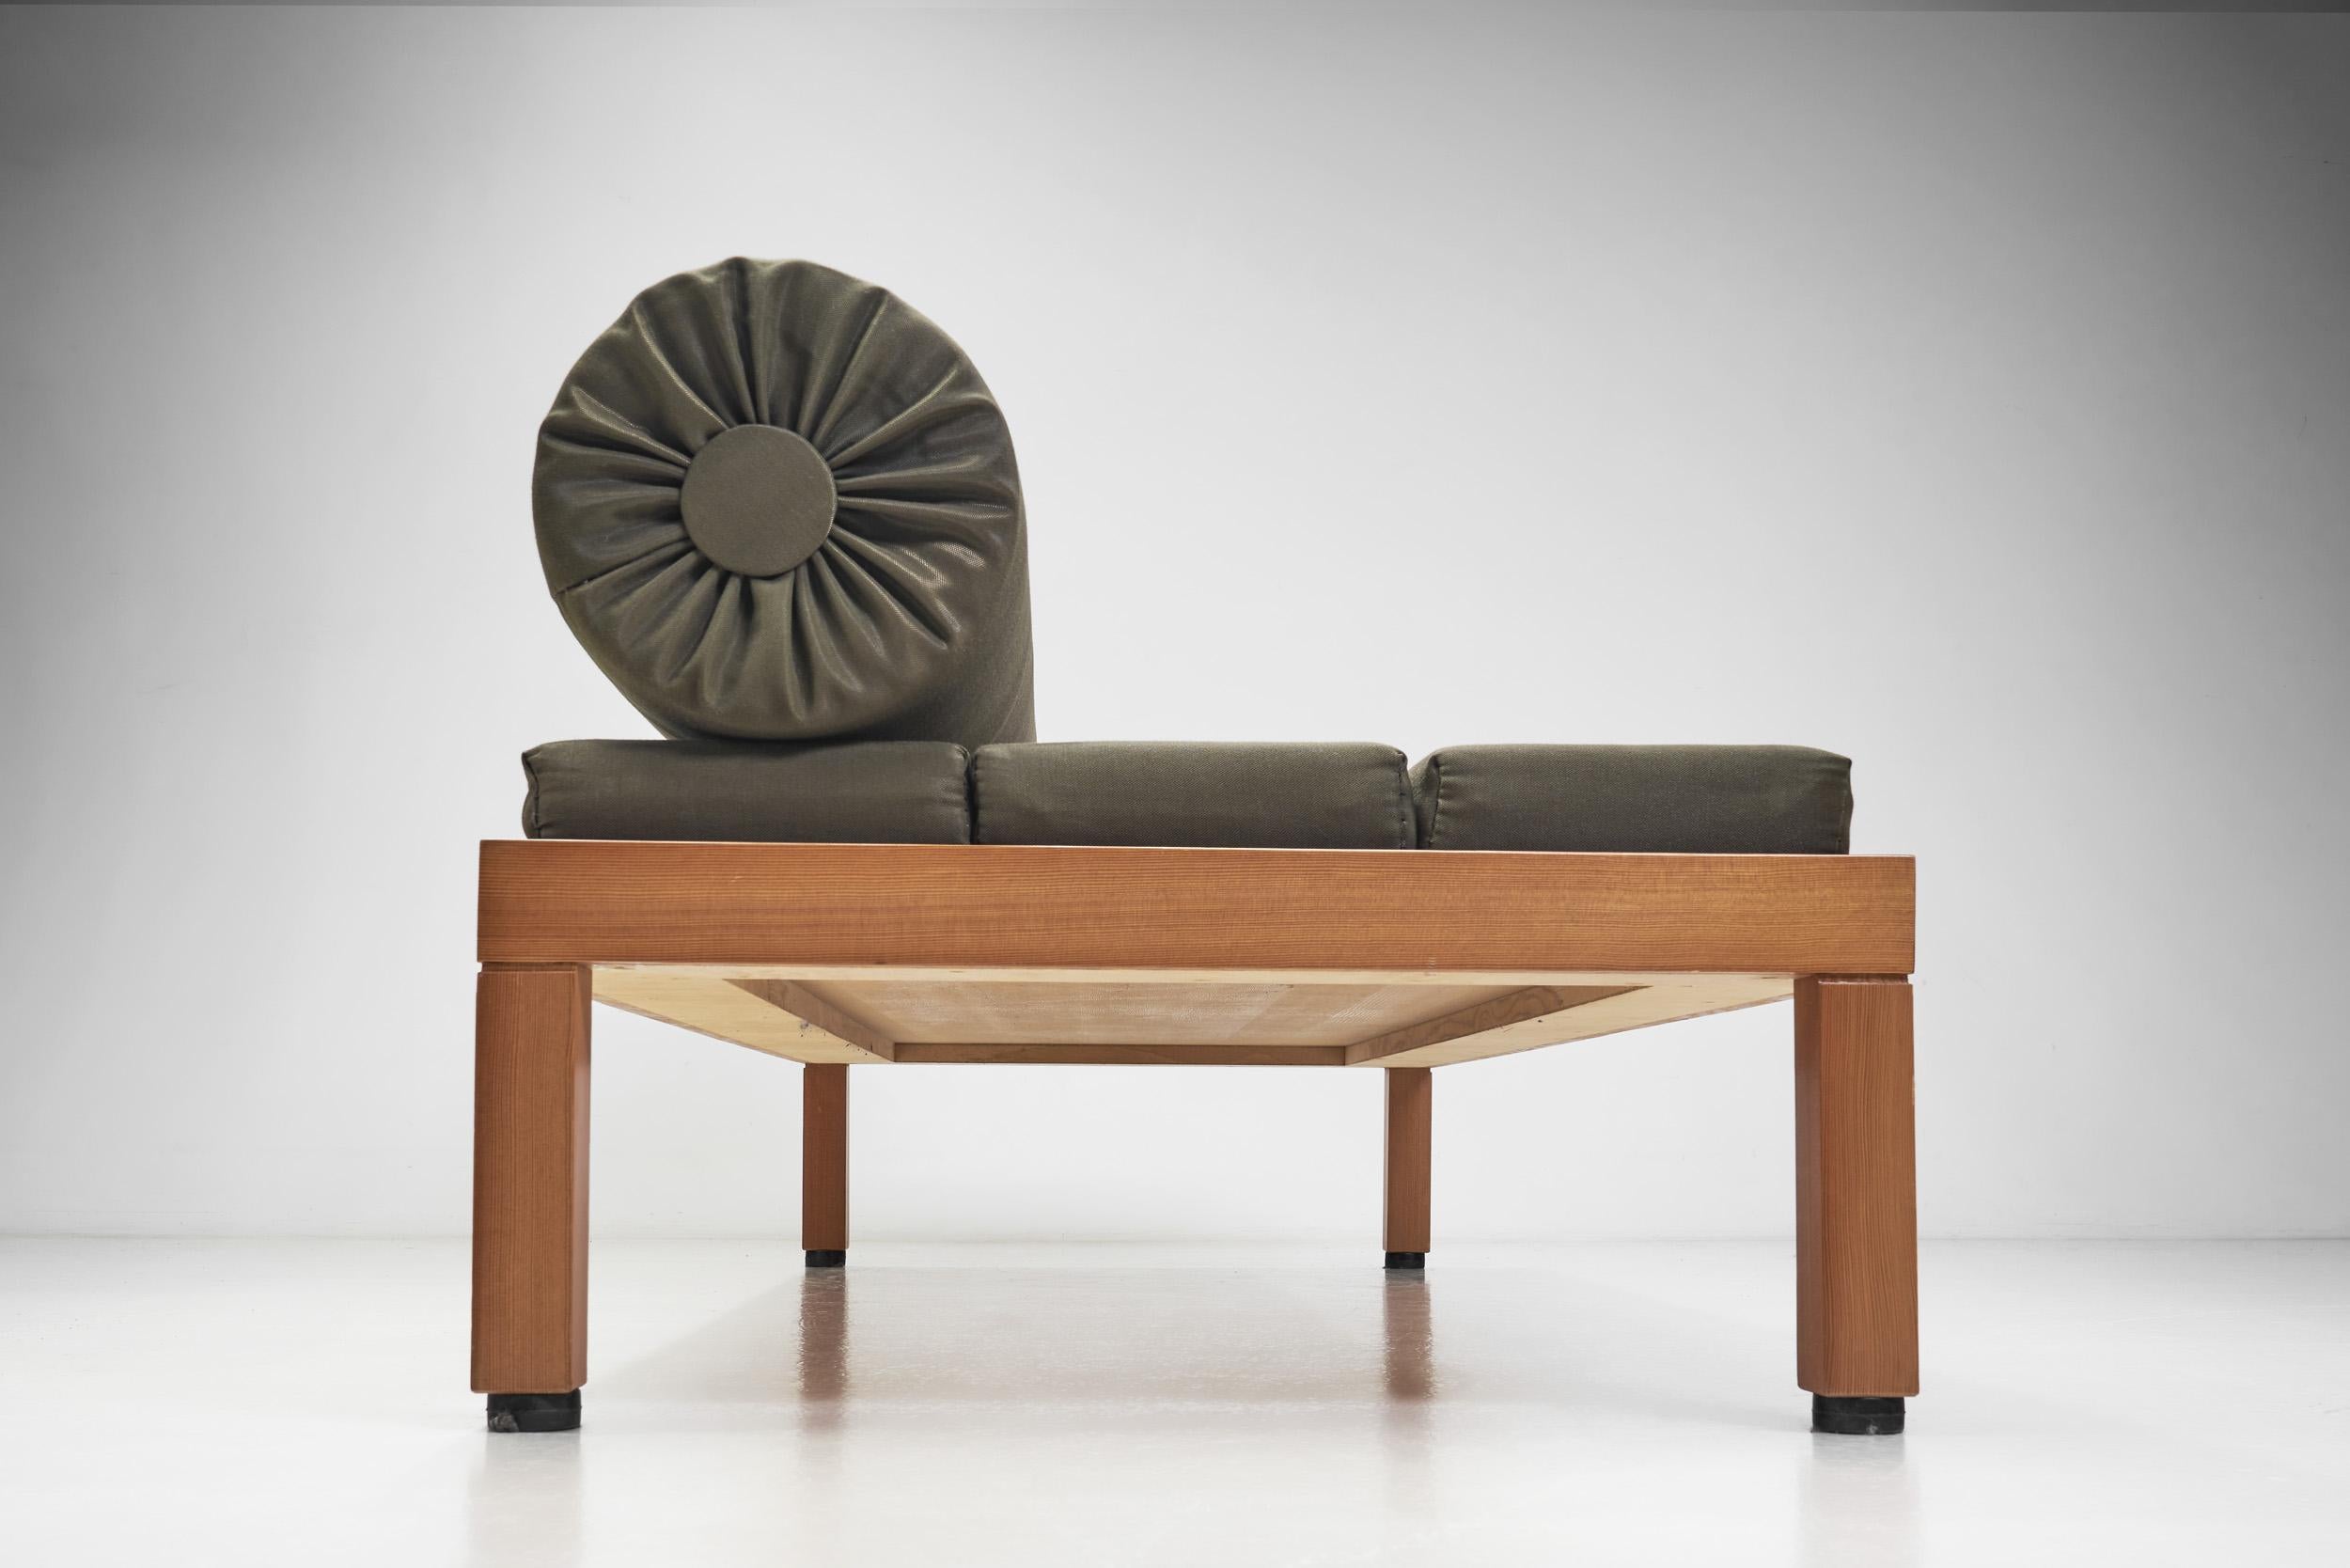 A Haroma, Saarinen, and Salo Design Collaboration Daybed, Finland 1960 For Sale 6